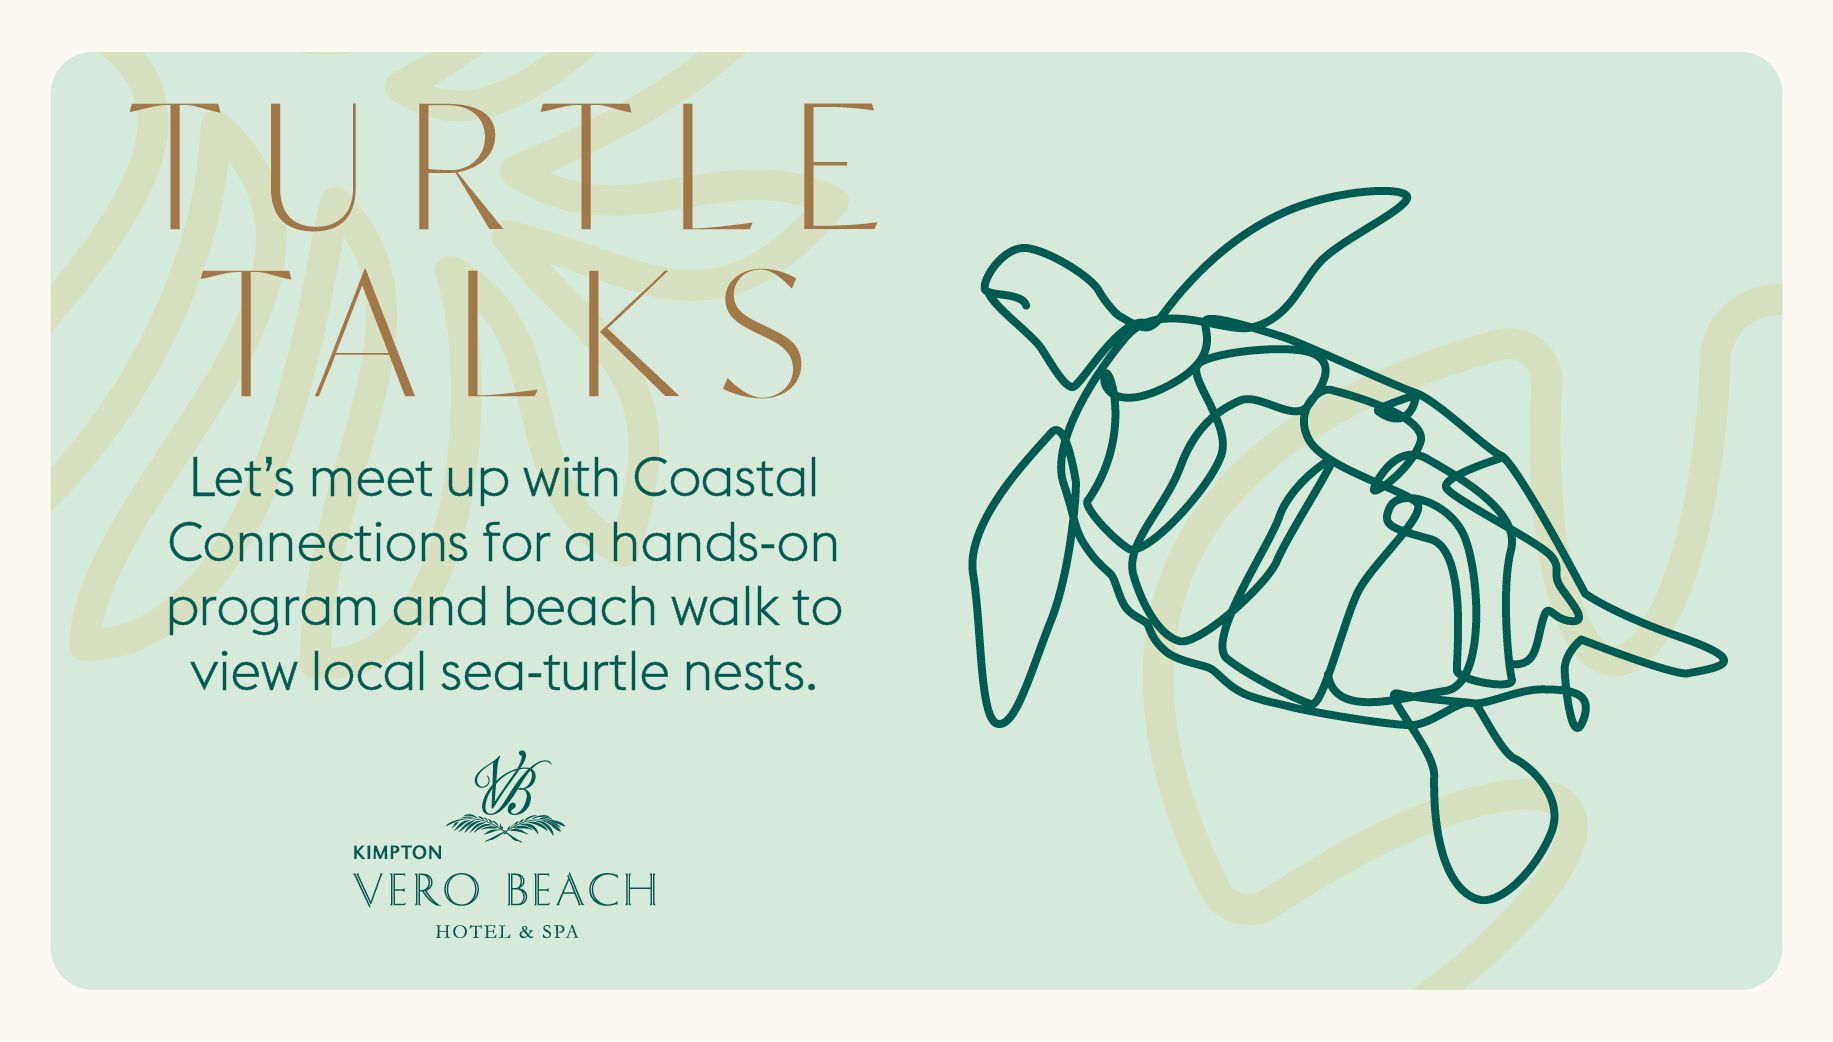 Turtle talks, Let's meet up with costal connections for a hands- on program and beach walk to view local sea-turtle nests.